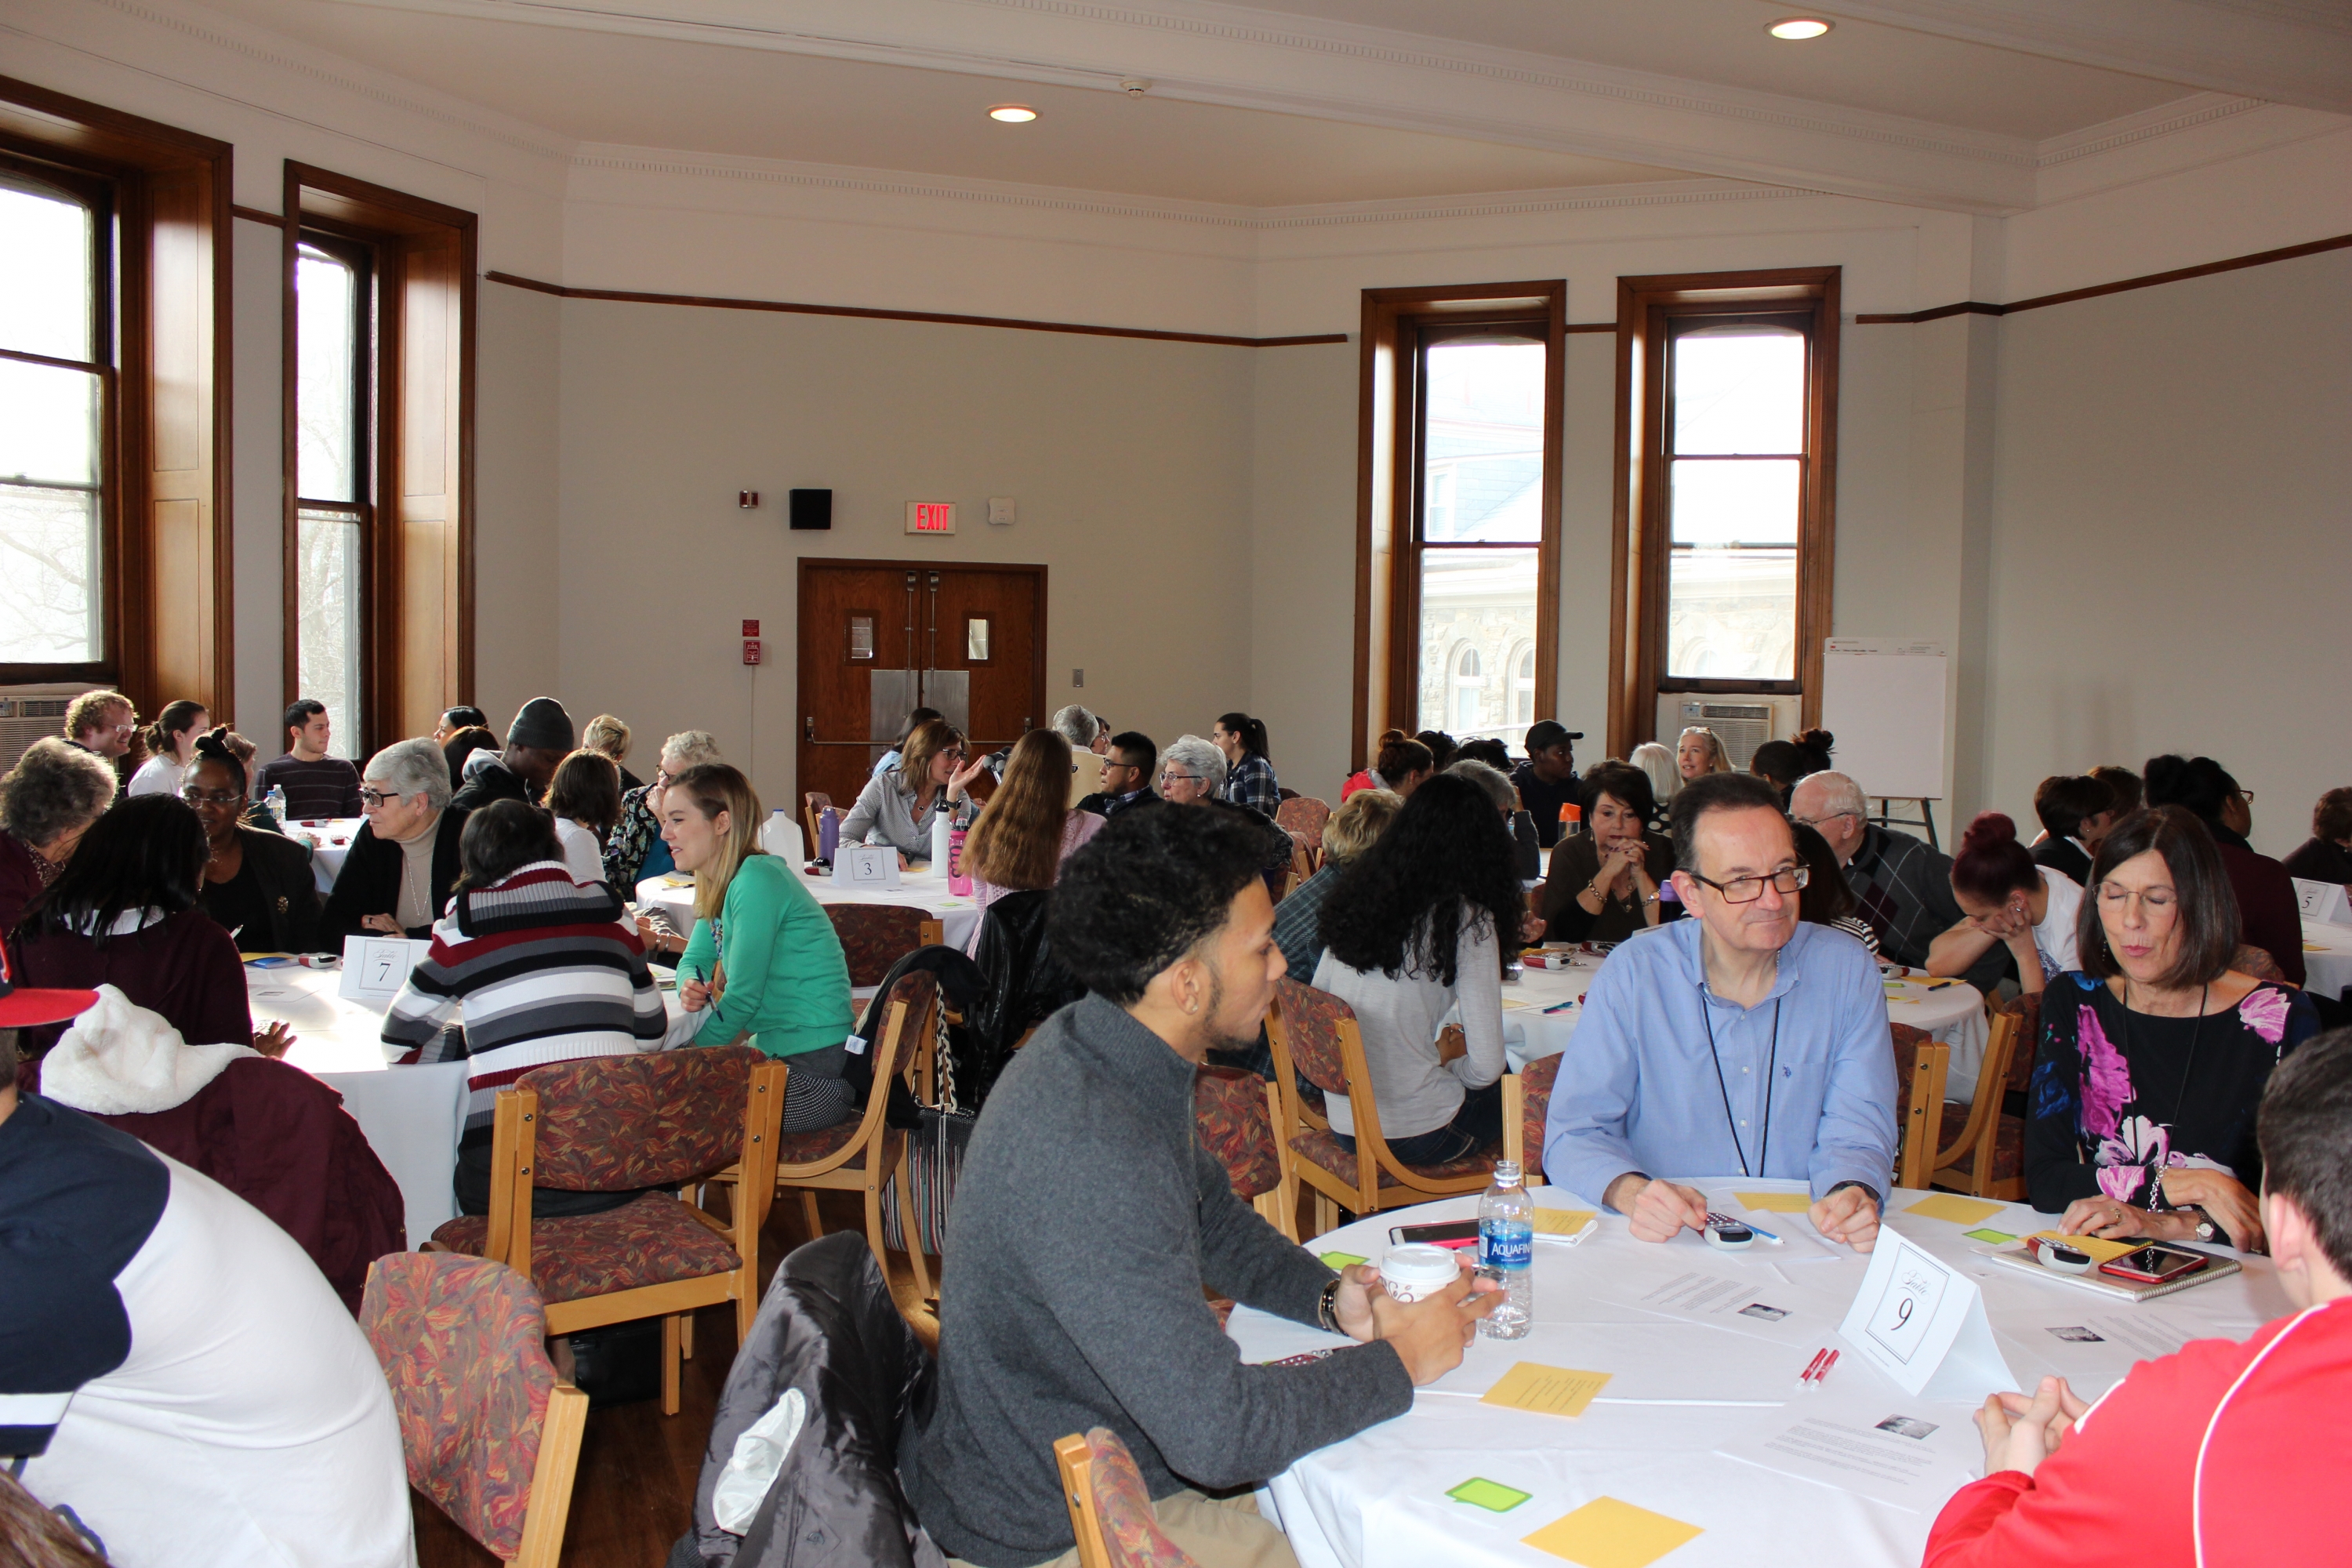 Members of the College community engage in table discussion and shared insights during the MLK Day of Remembrance.